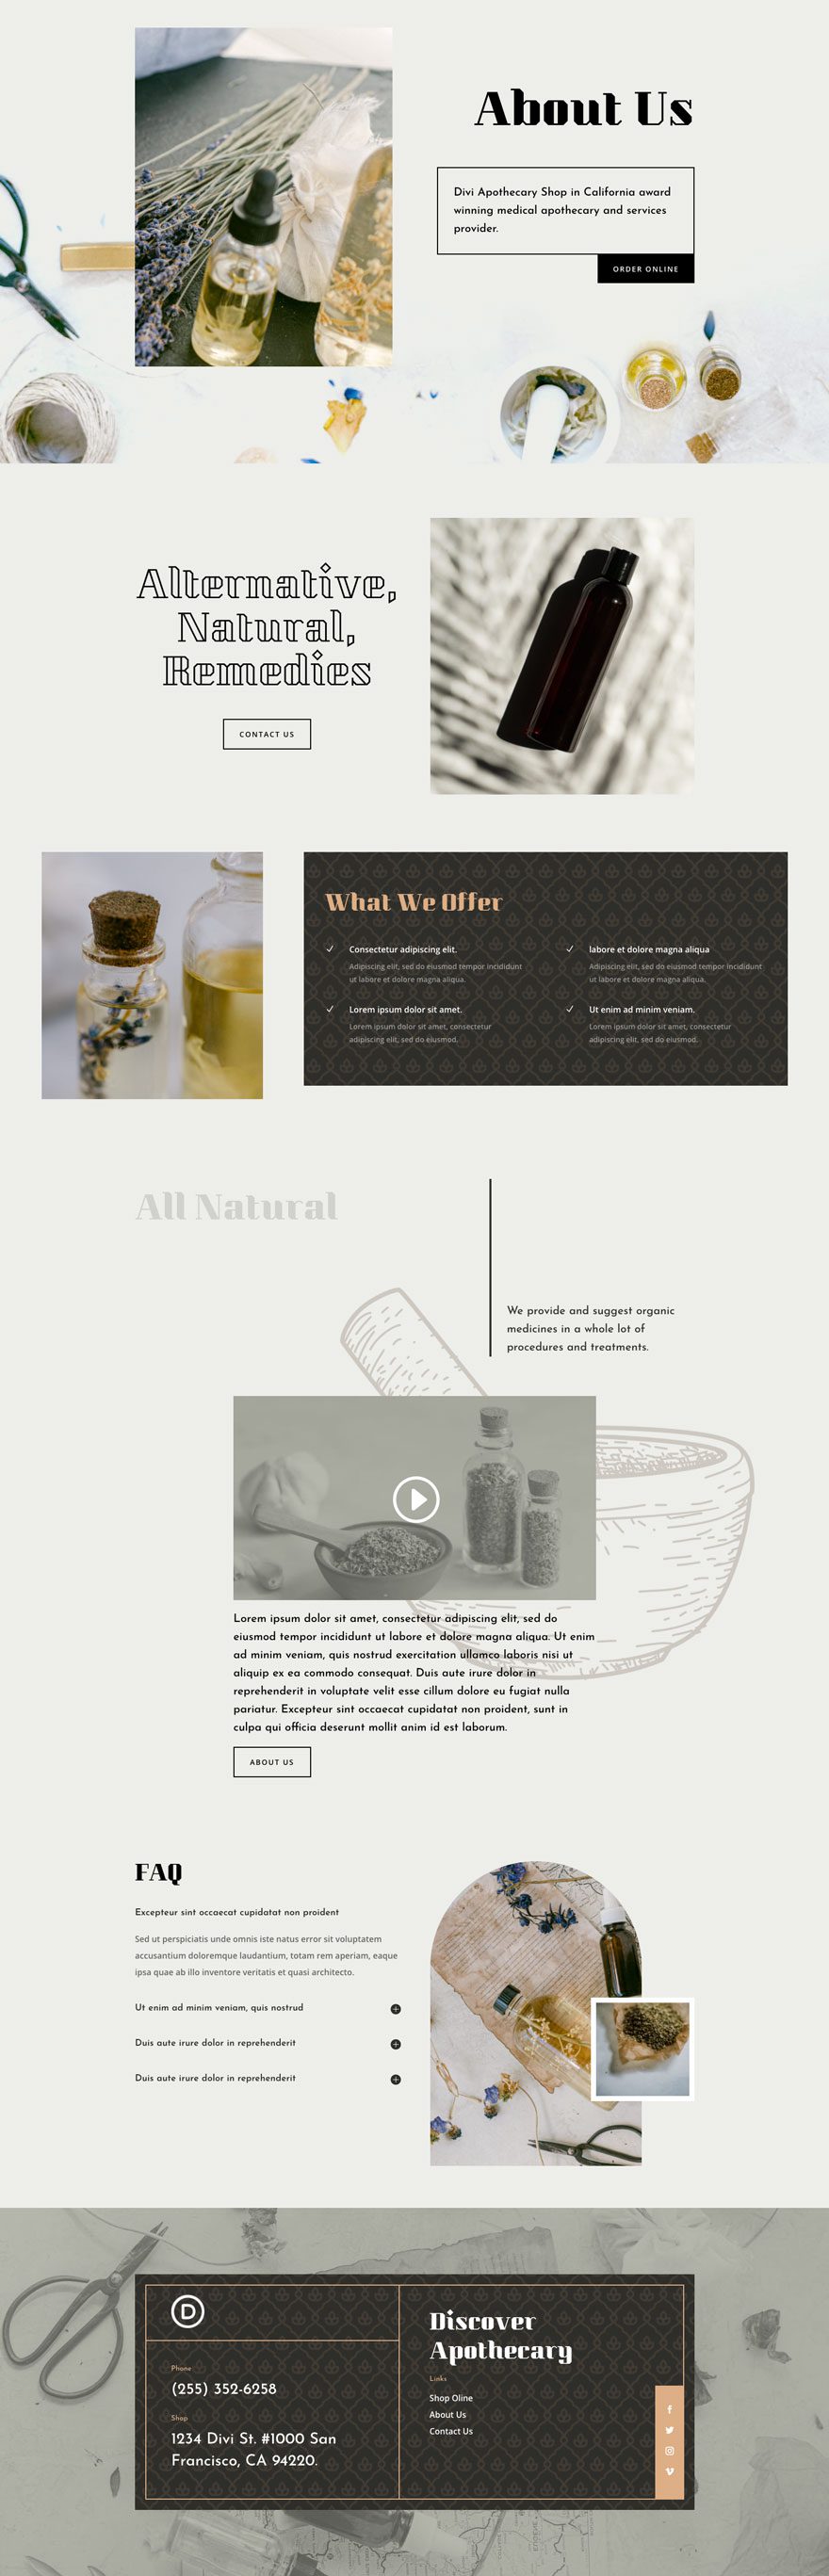 divi apothecary layout pack